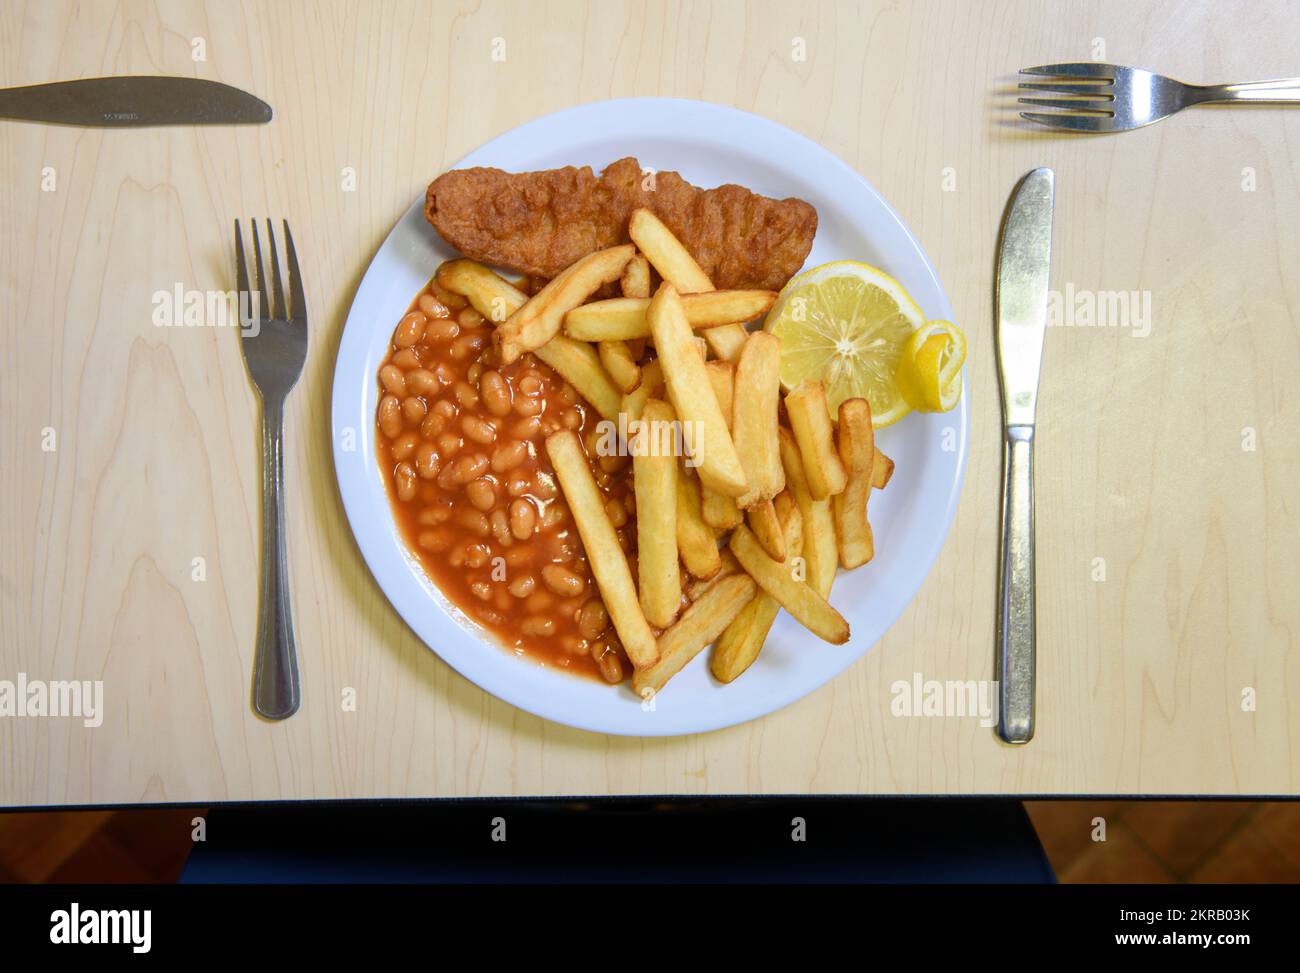 School dinners - fish & Chips with beans. Stock Photo